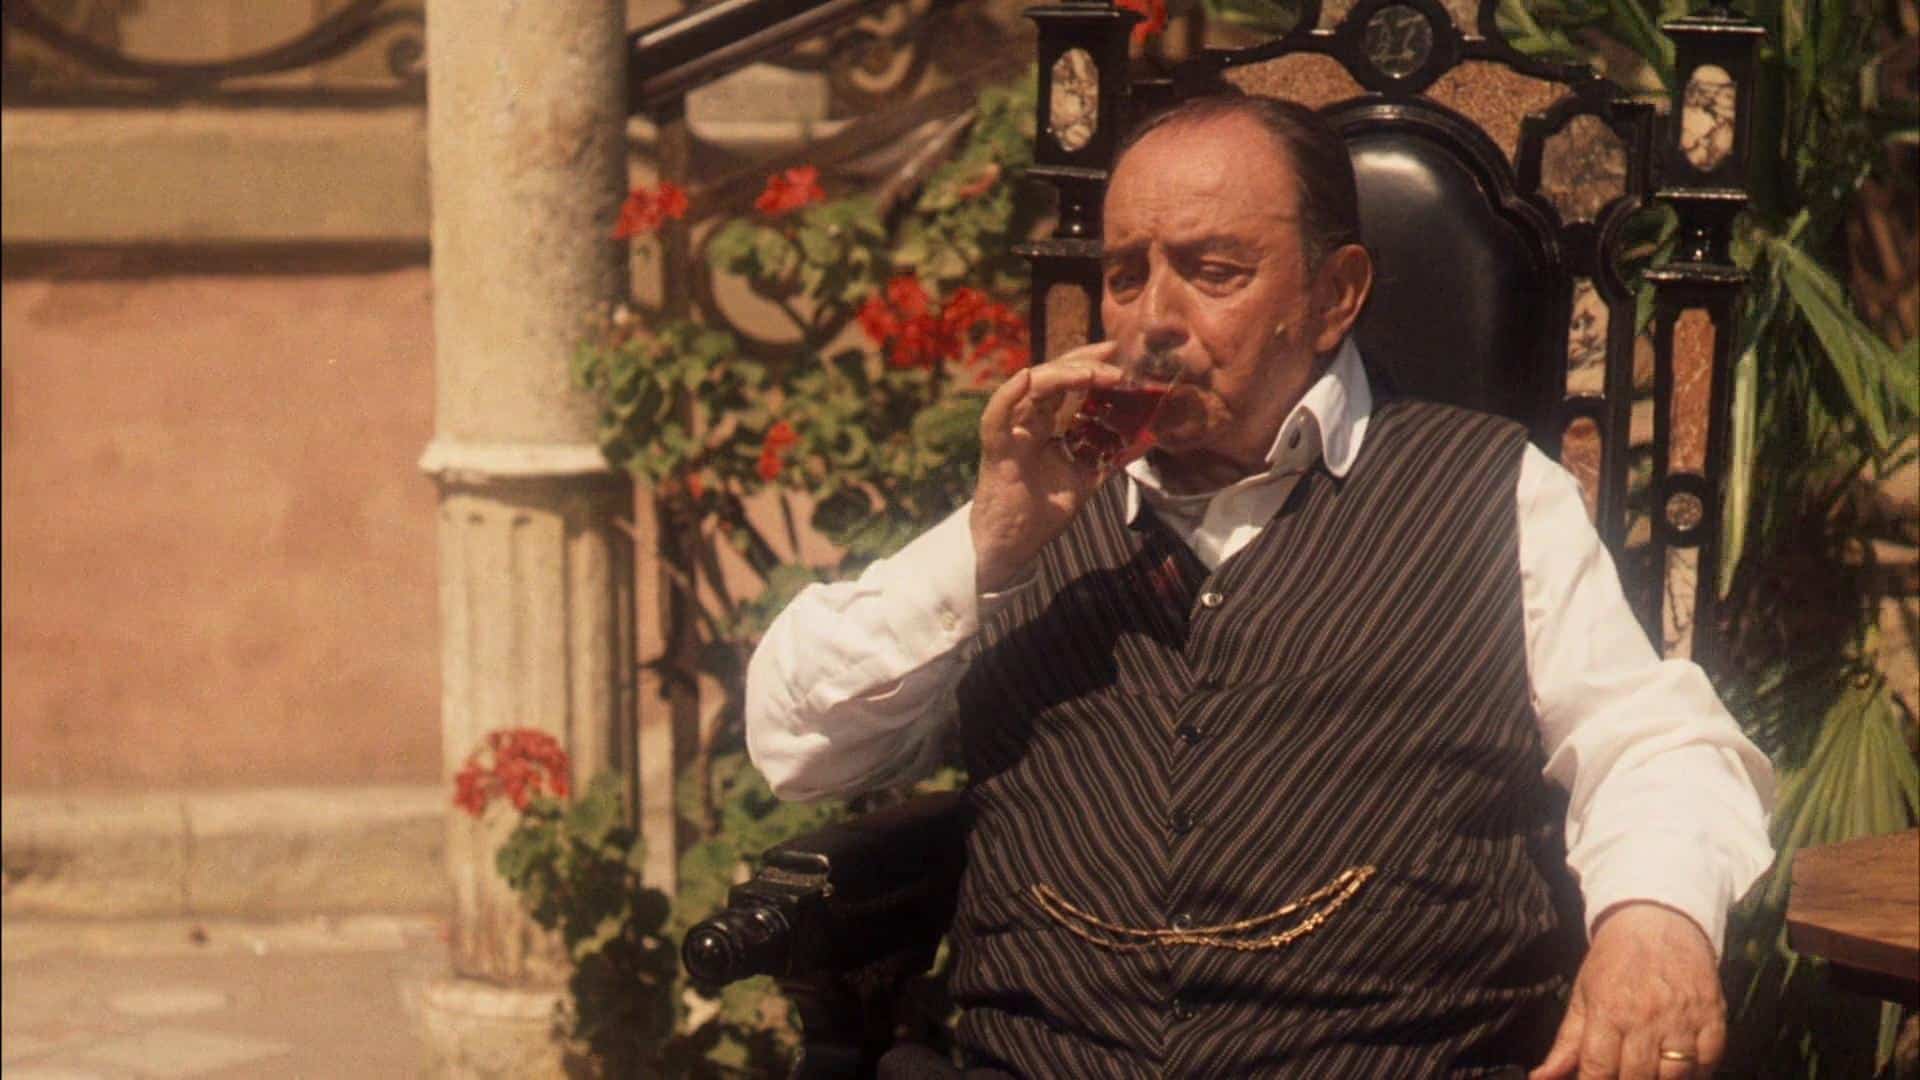 Giuseppe Sillato in The Godfather Part II (1974)